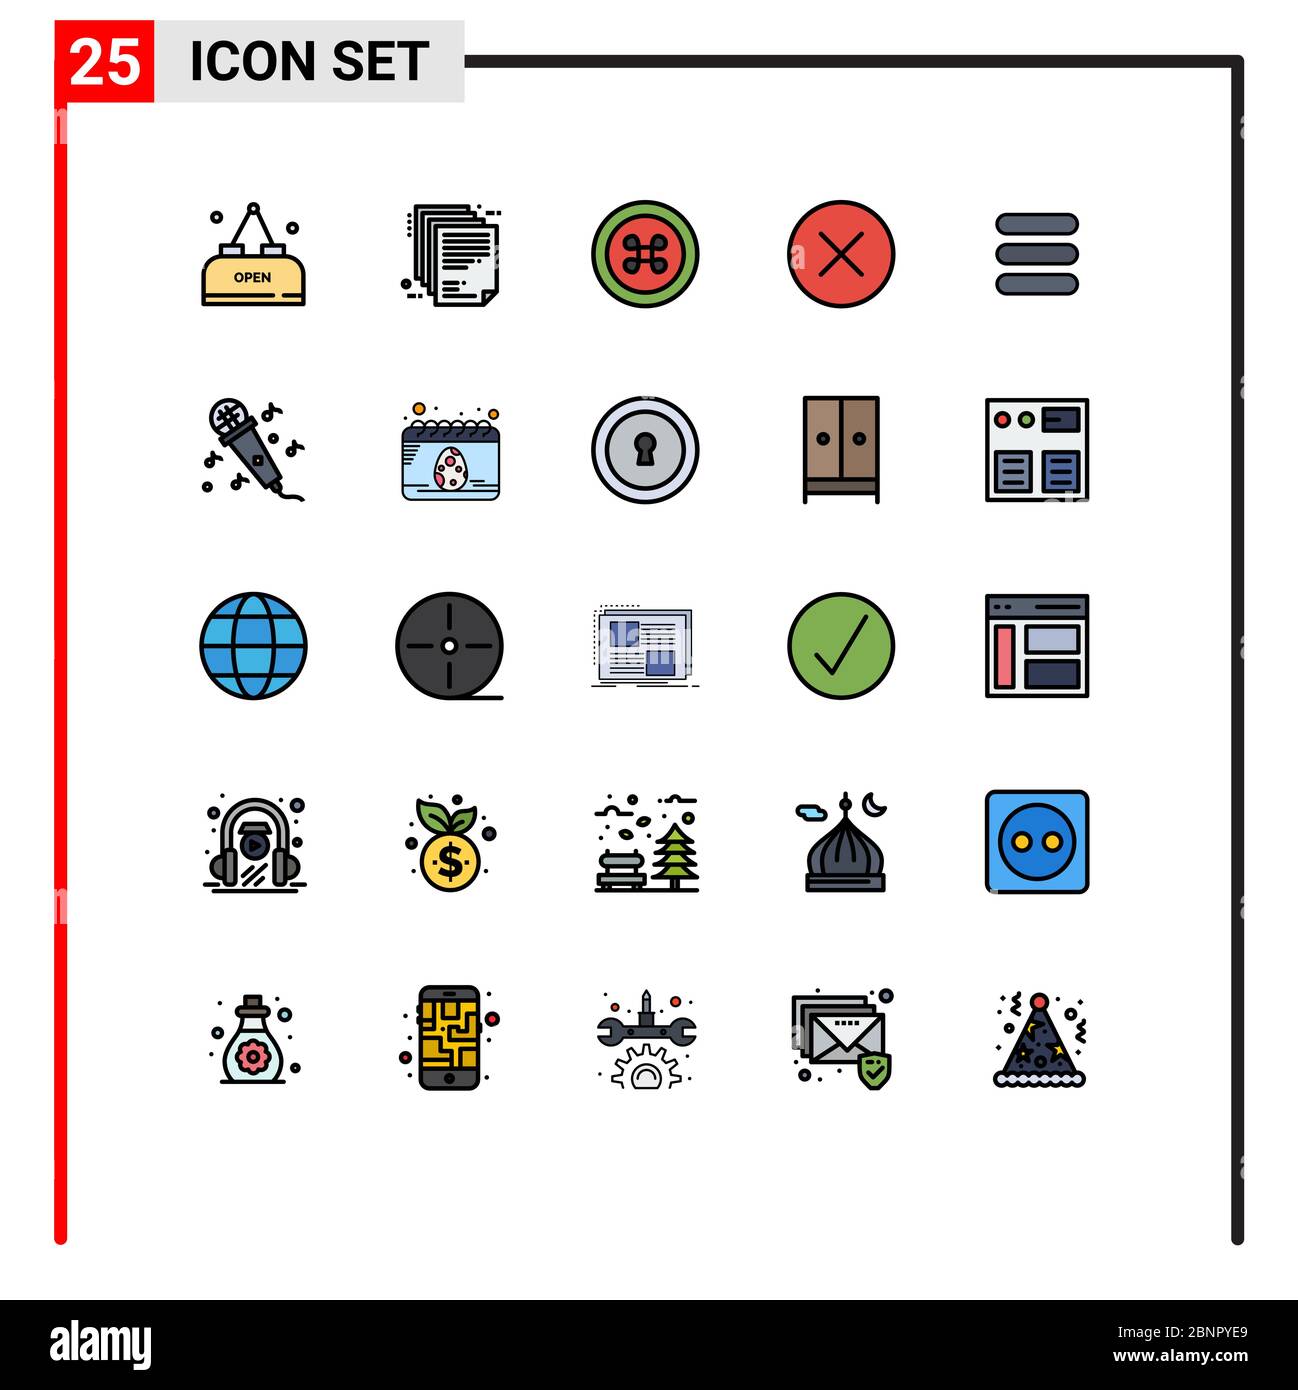 25 Creative Icons Modern Signs and Symbols of text, list, paper, hide, circle Editable Vector Design Elements Stock Vector